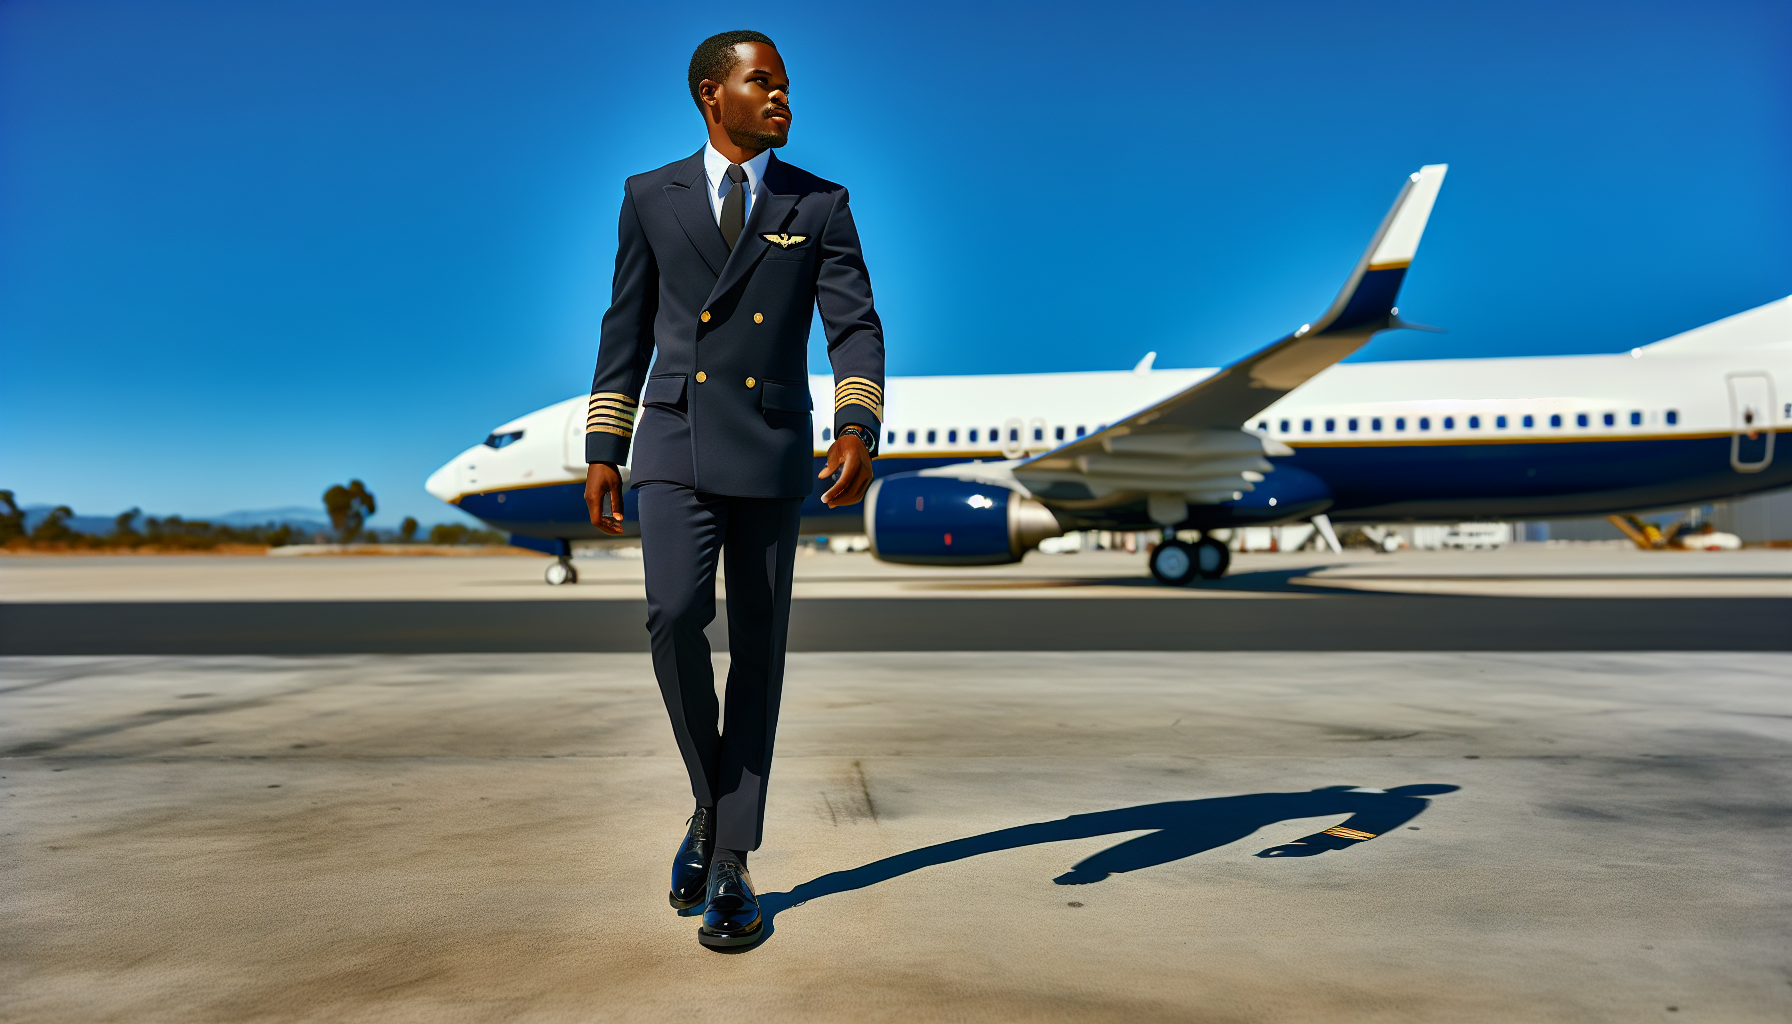 Commercial pilot in uniform walking towards an airplane